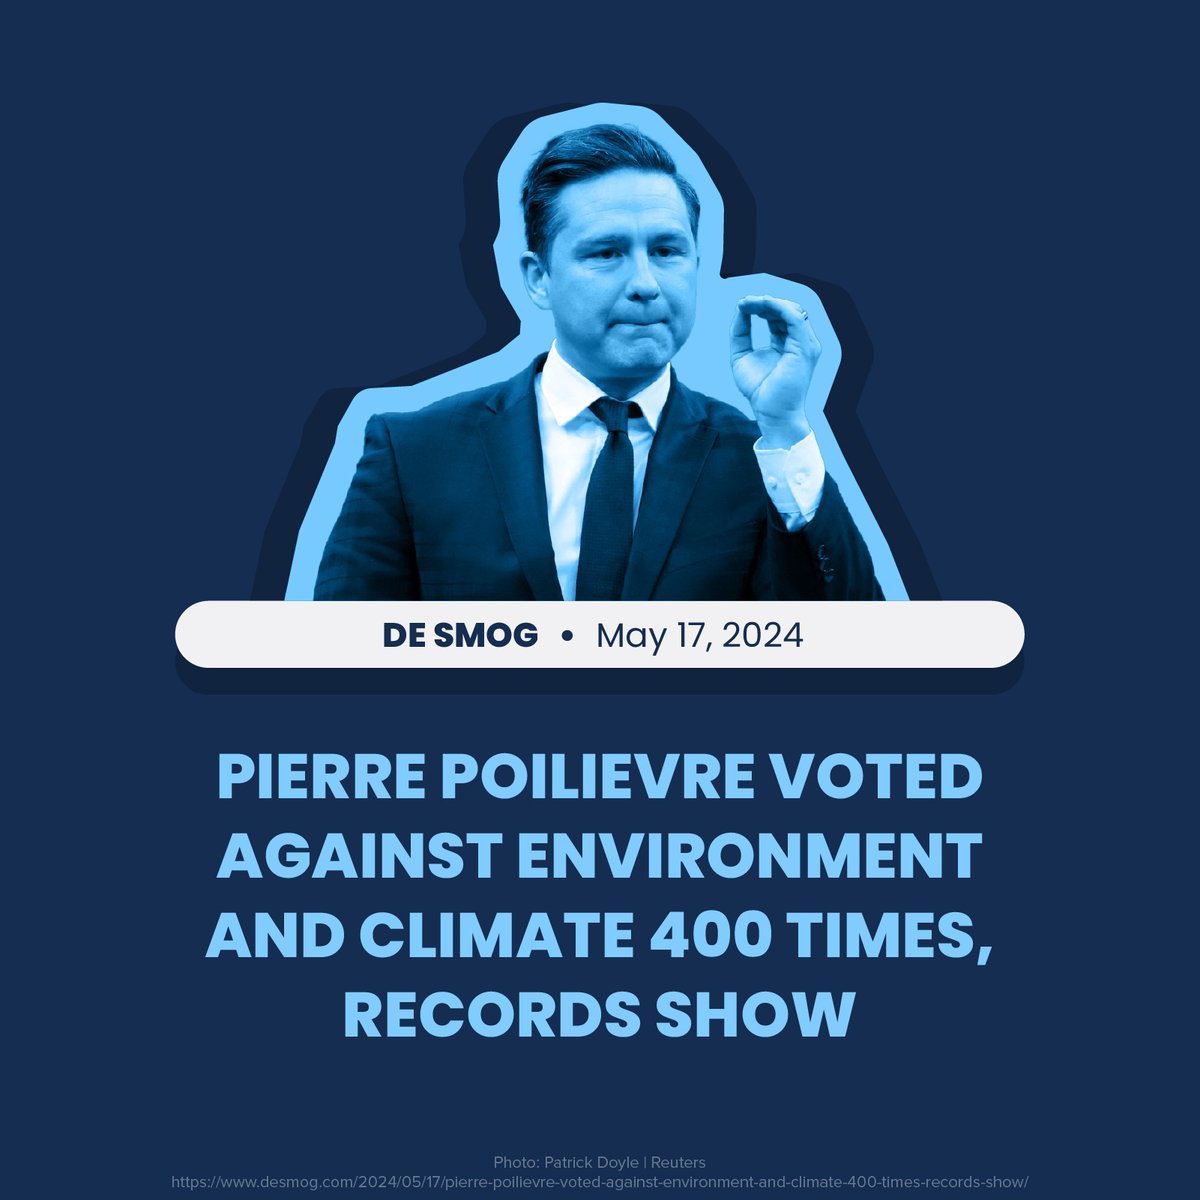 Pierre Poilievre will scrap Canada’s climate plan.

Pass it on.